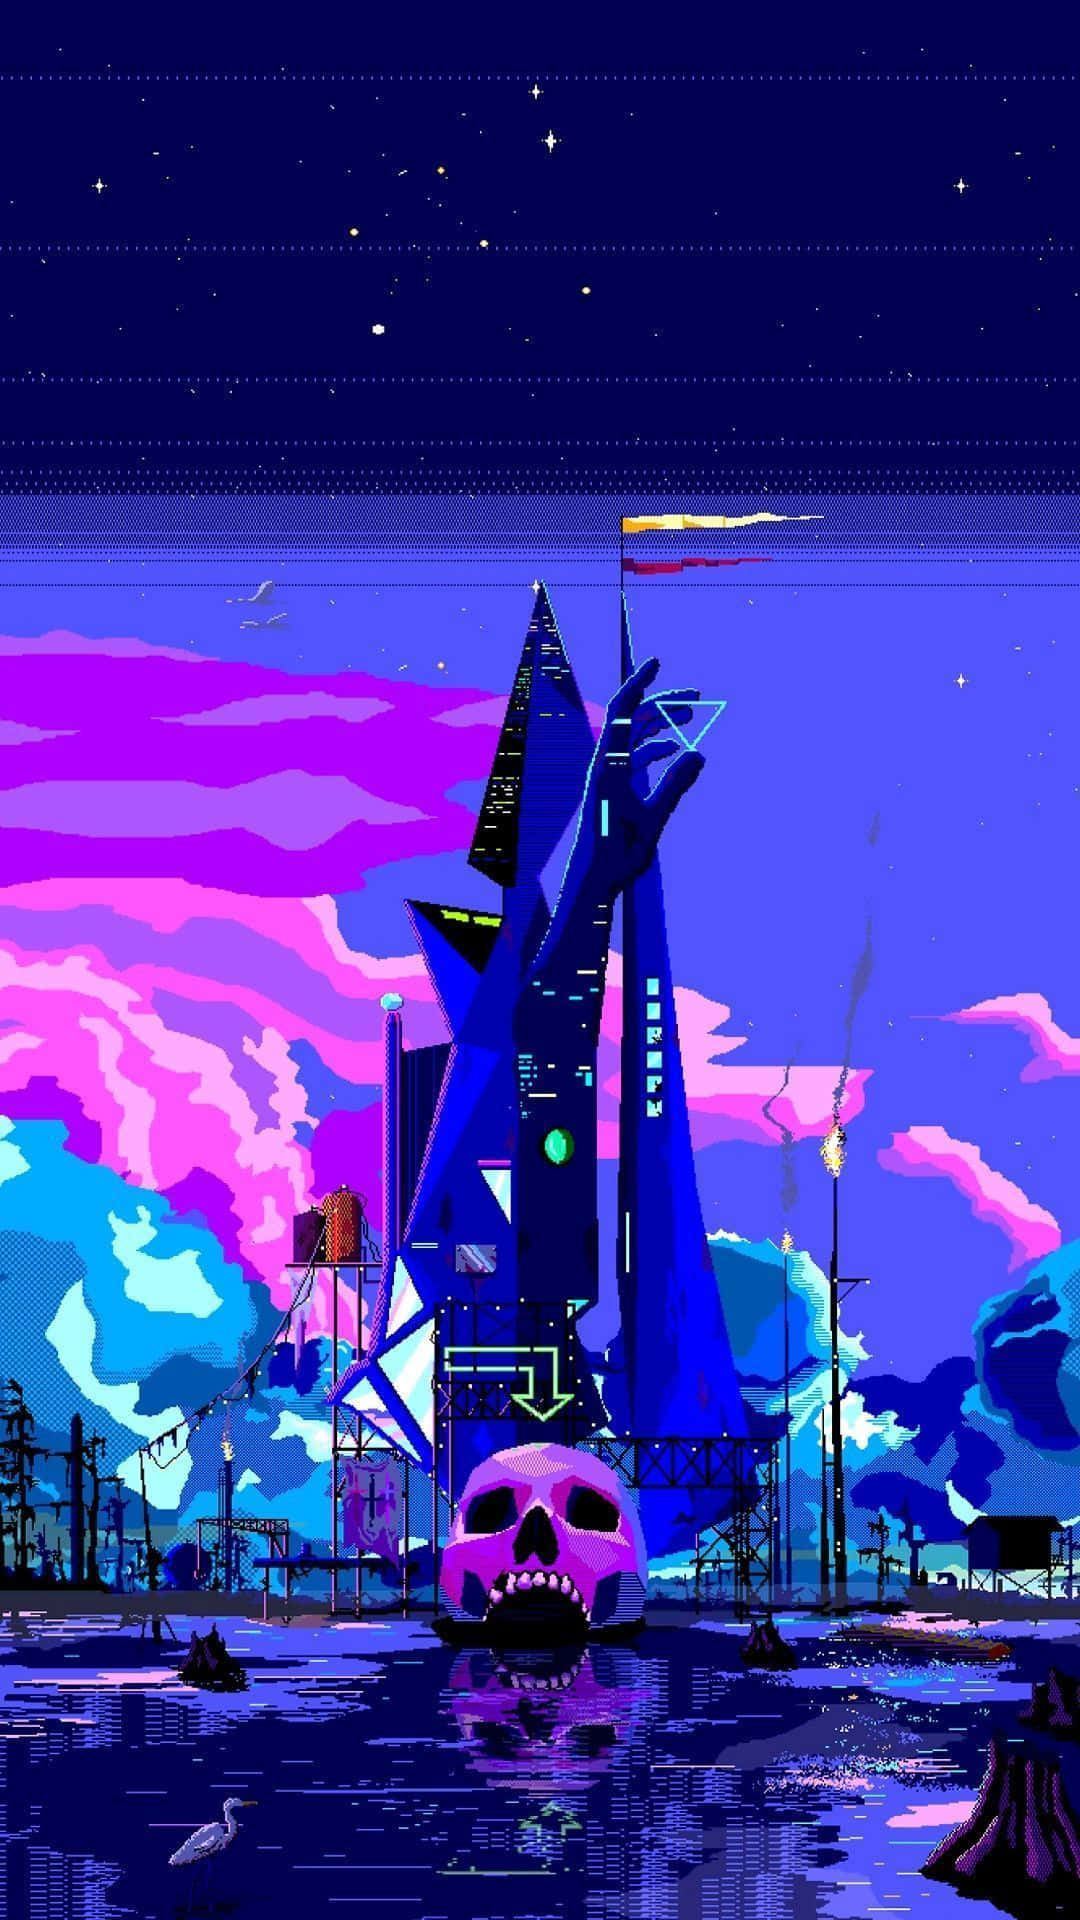 A Pixel Art Image Of A City With A Skull And A Ship Wallpaper